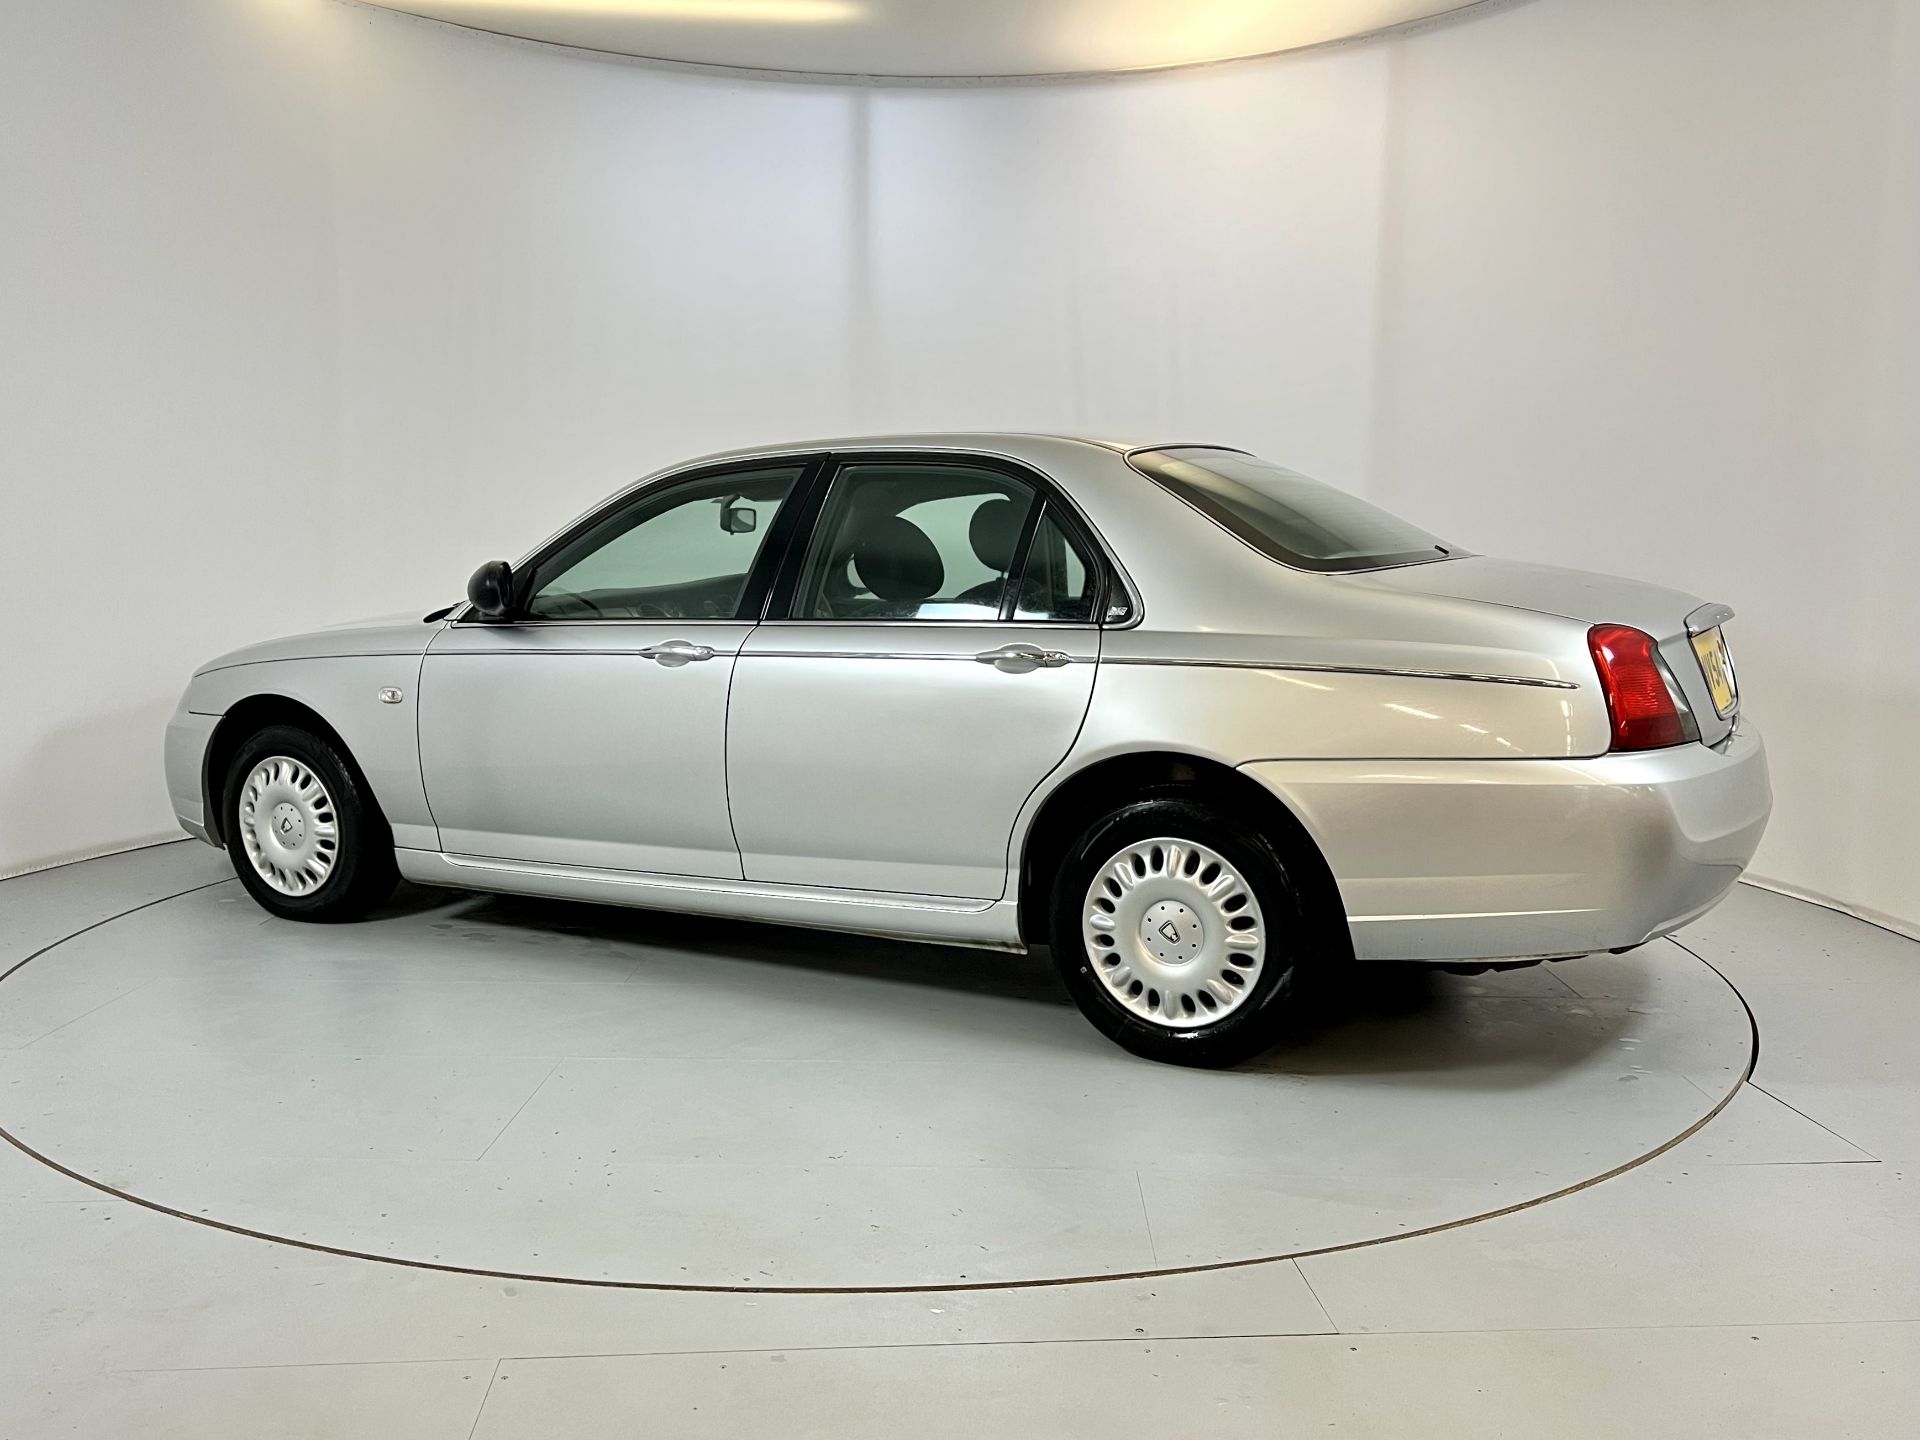 Rover 75 - Image 6 of 33